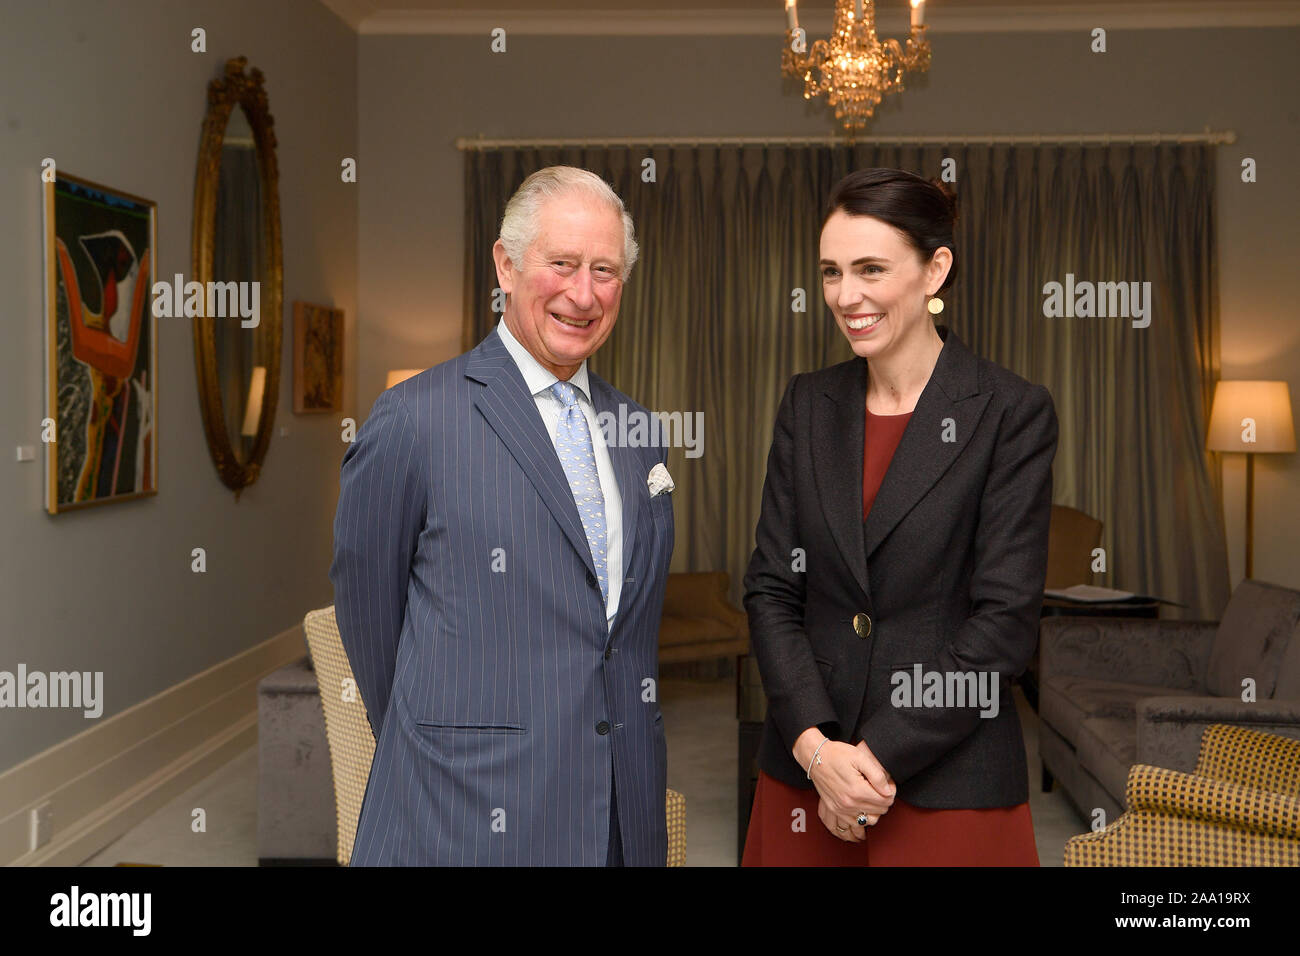 The Prince of Wales meets with the Prime Minister of New Zealand Jacinda Ardern, at Government House in Auckland, on the third day of the royal visit to New Zealand. Stock Photo